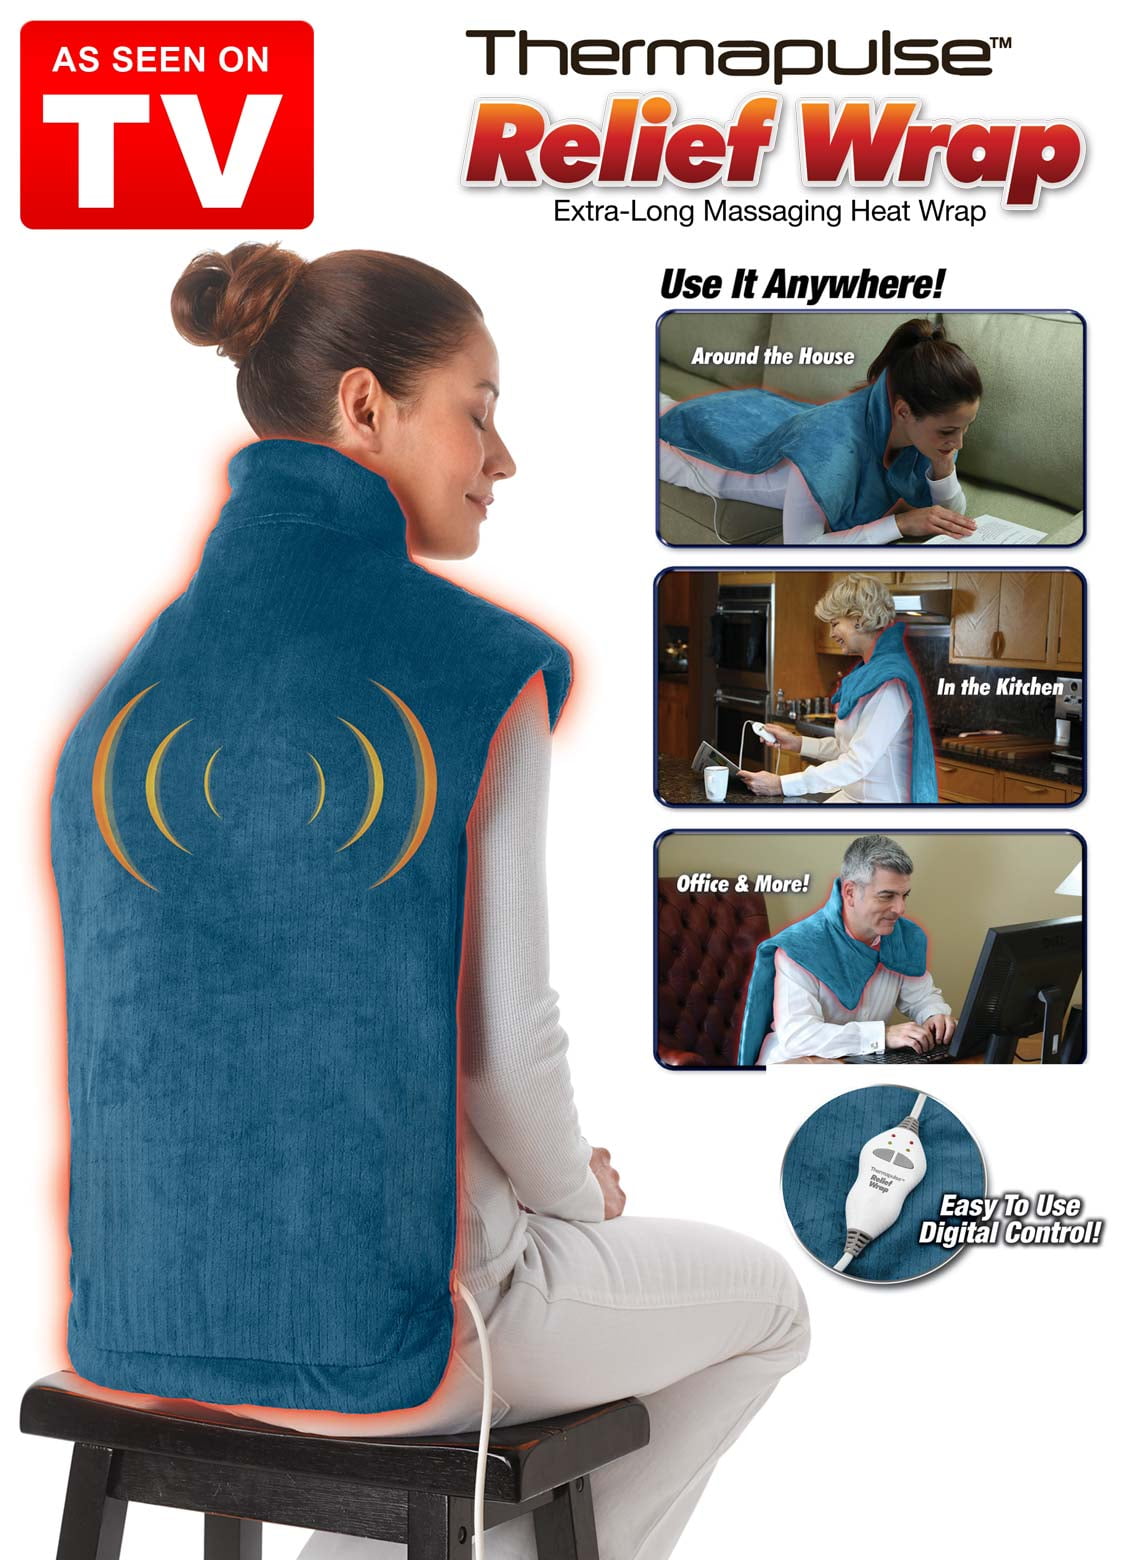 massaging heating pads for the back